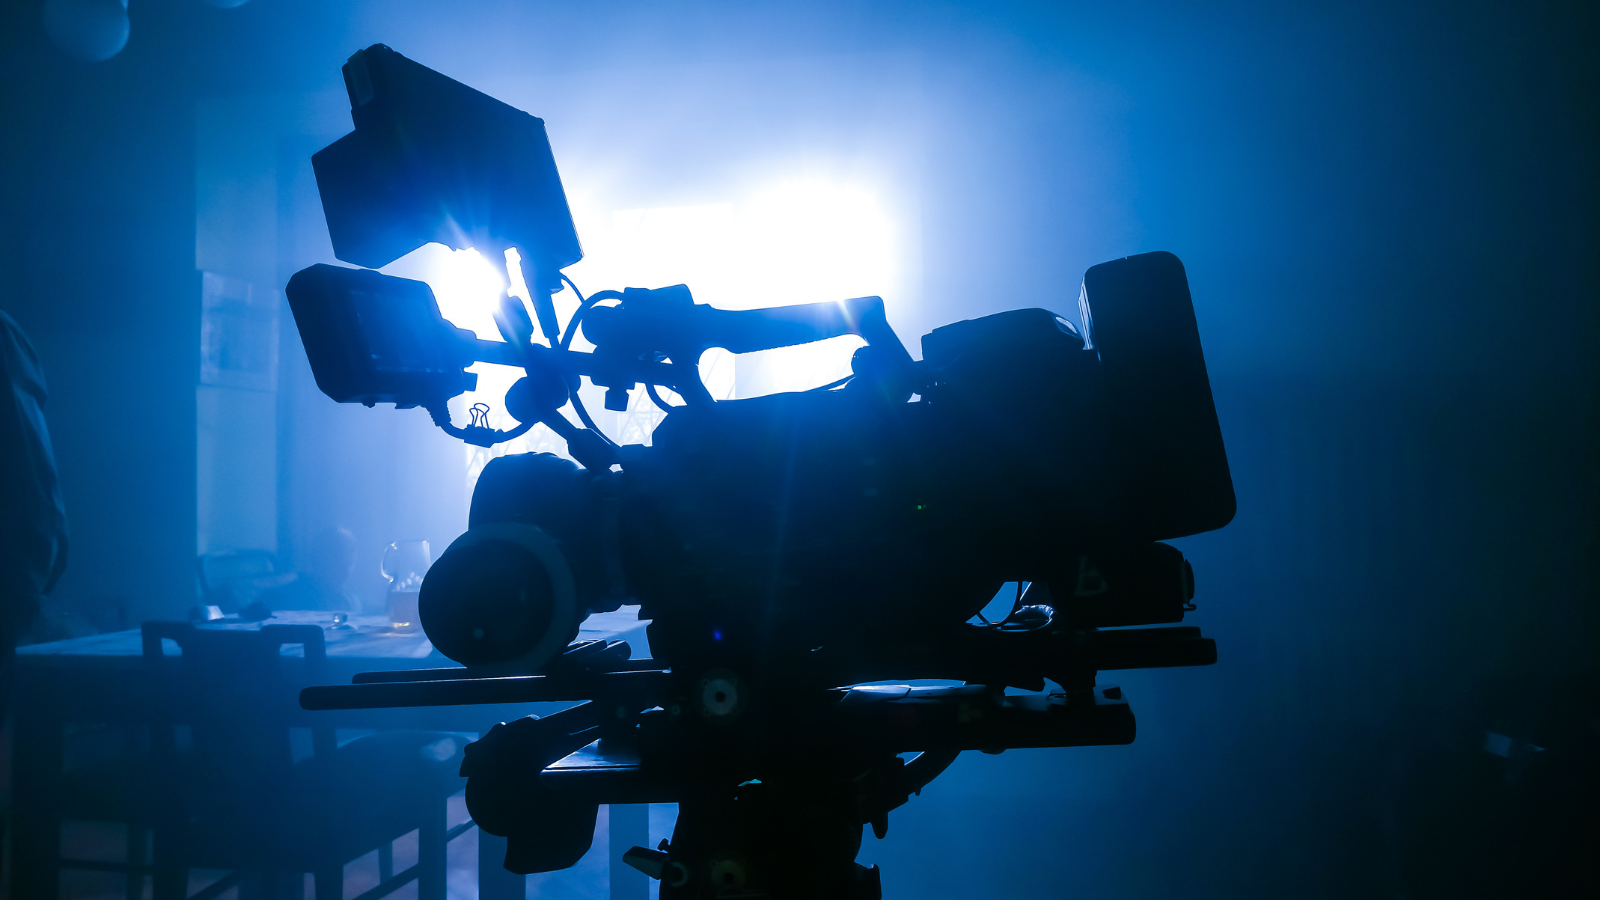 A film camera in silhouette, with soft blue and white light filtering through from behind it